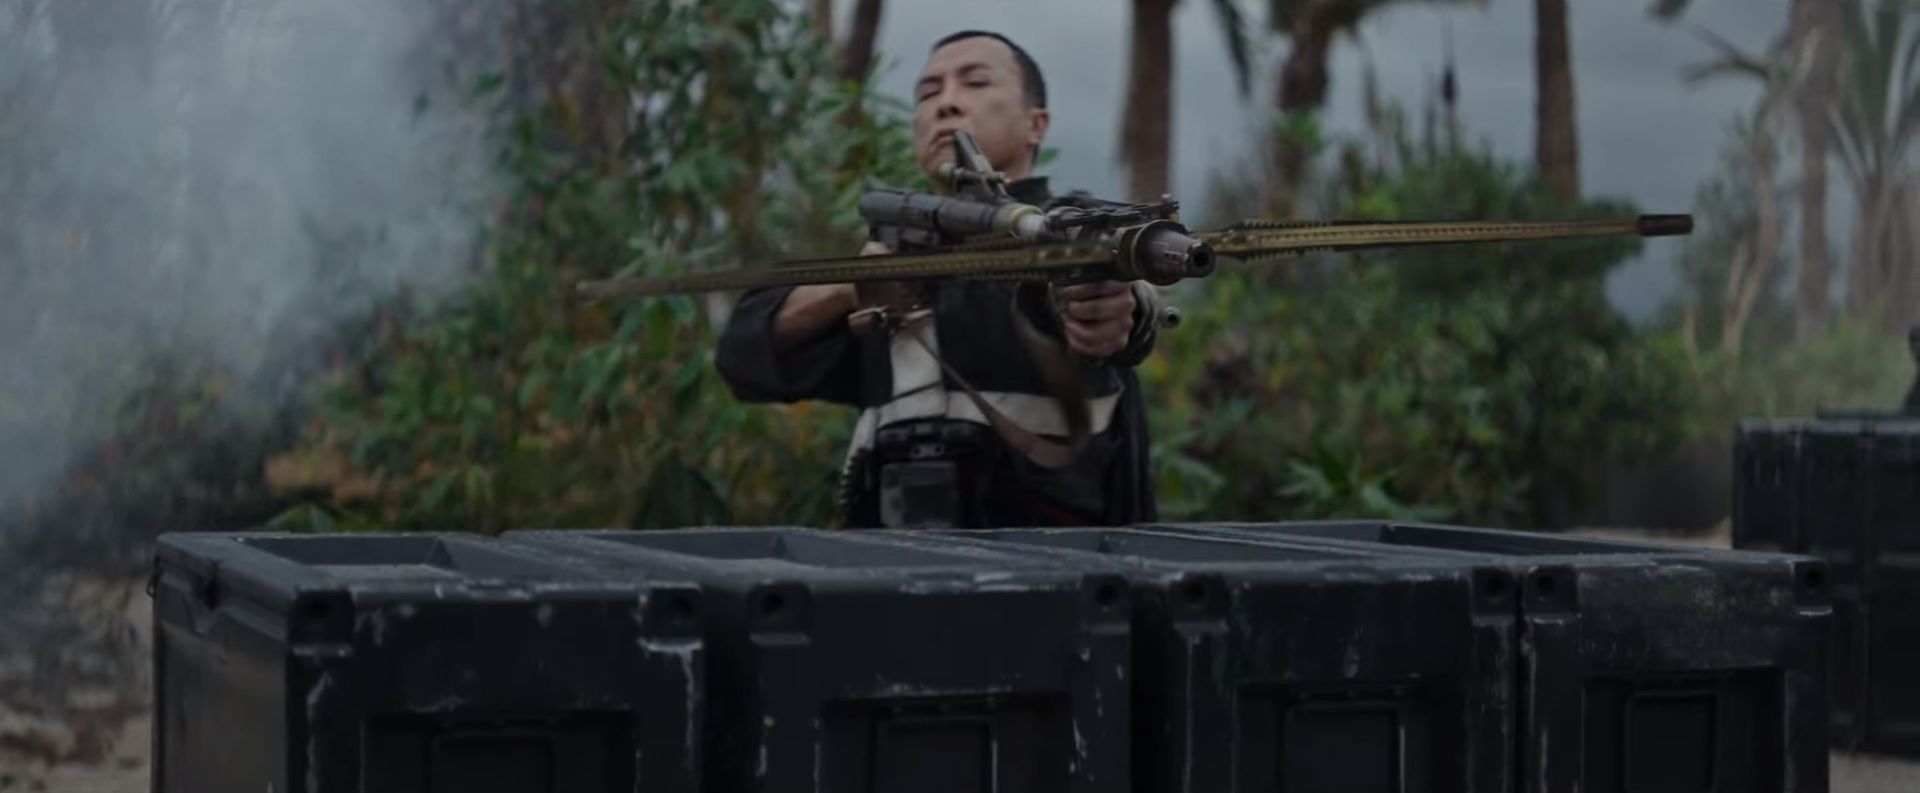 Rogue One A Star Wars Story Trailer 3 - Chirrut Imwe with crossbow